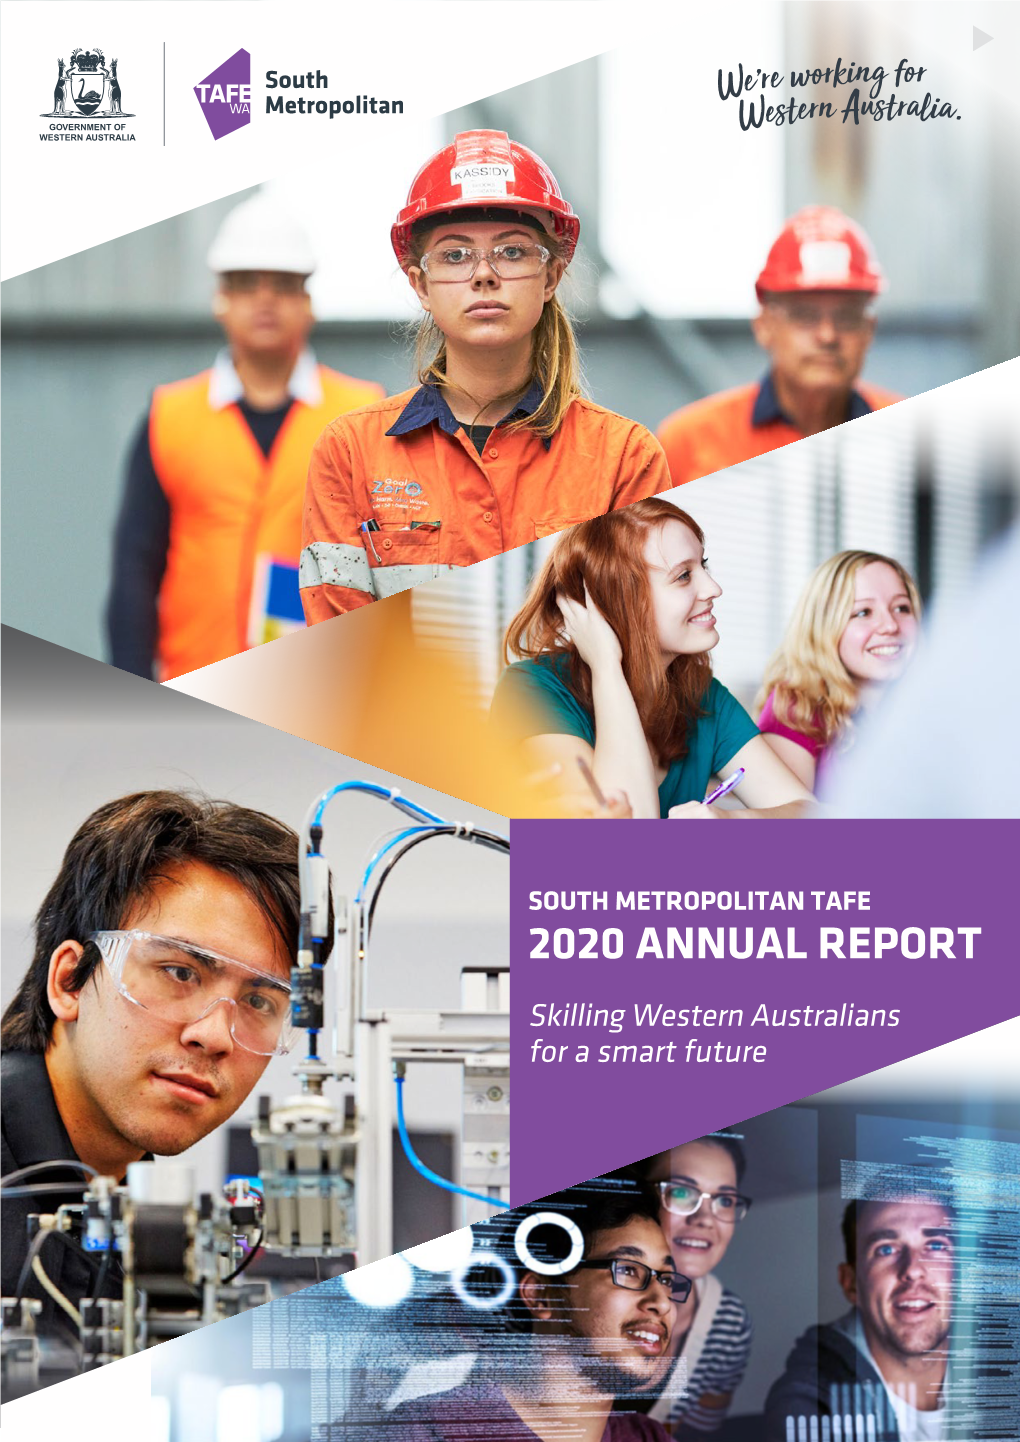 SOUTH METROPOLITAN TAFE 2020 ANNUAL REPORT Skilling Western Australians for a Smart Future Statement of Compliance to the Hon